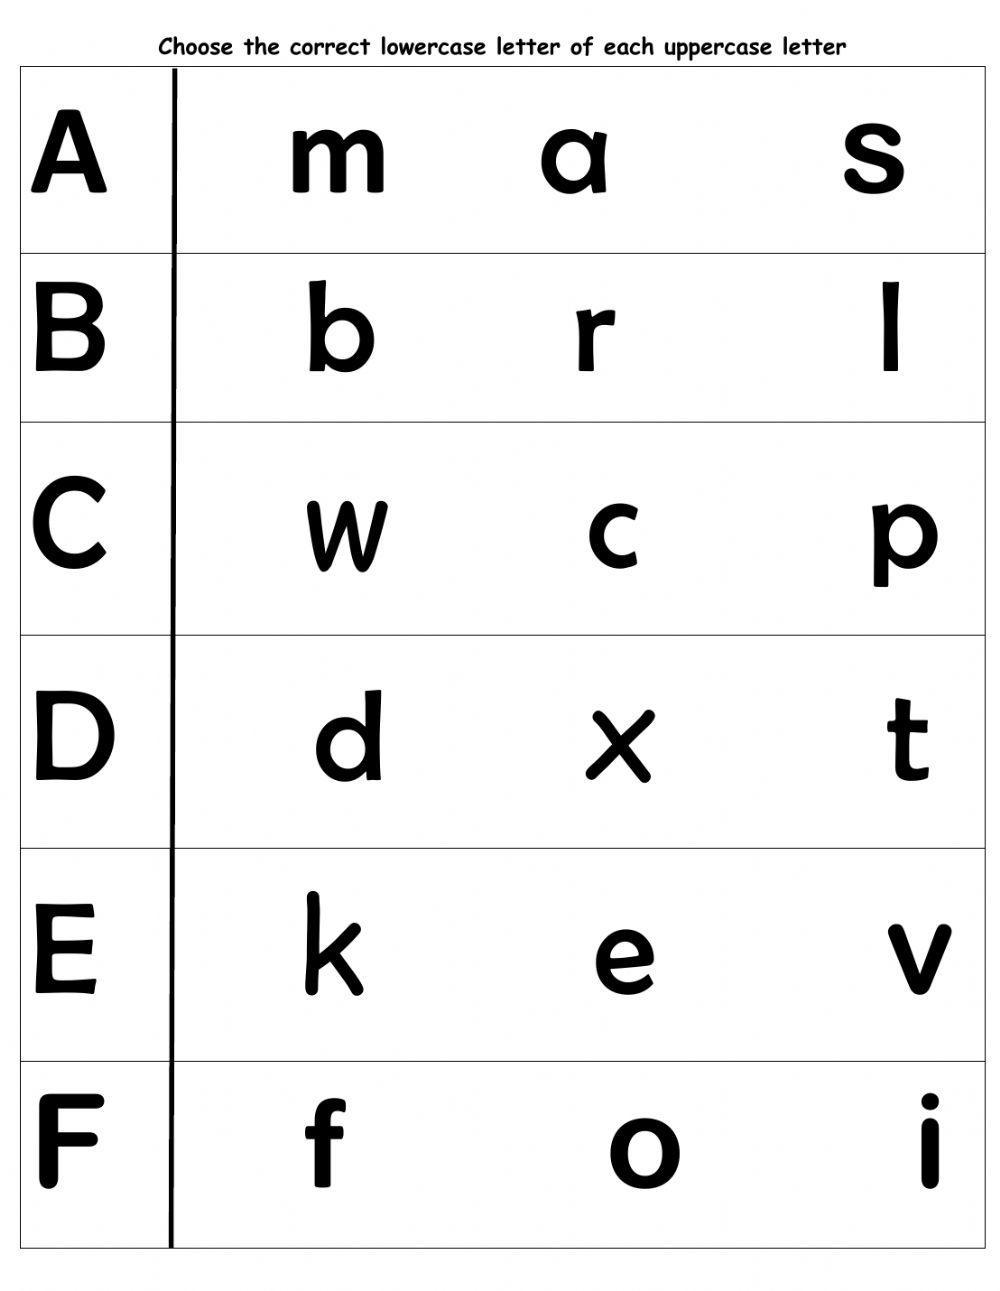 Upper - lowercase letters a to f